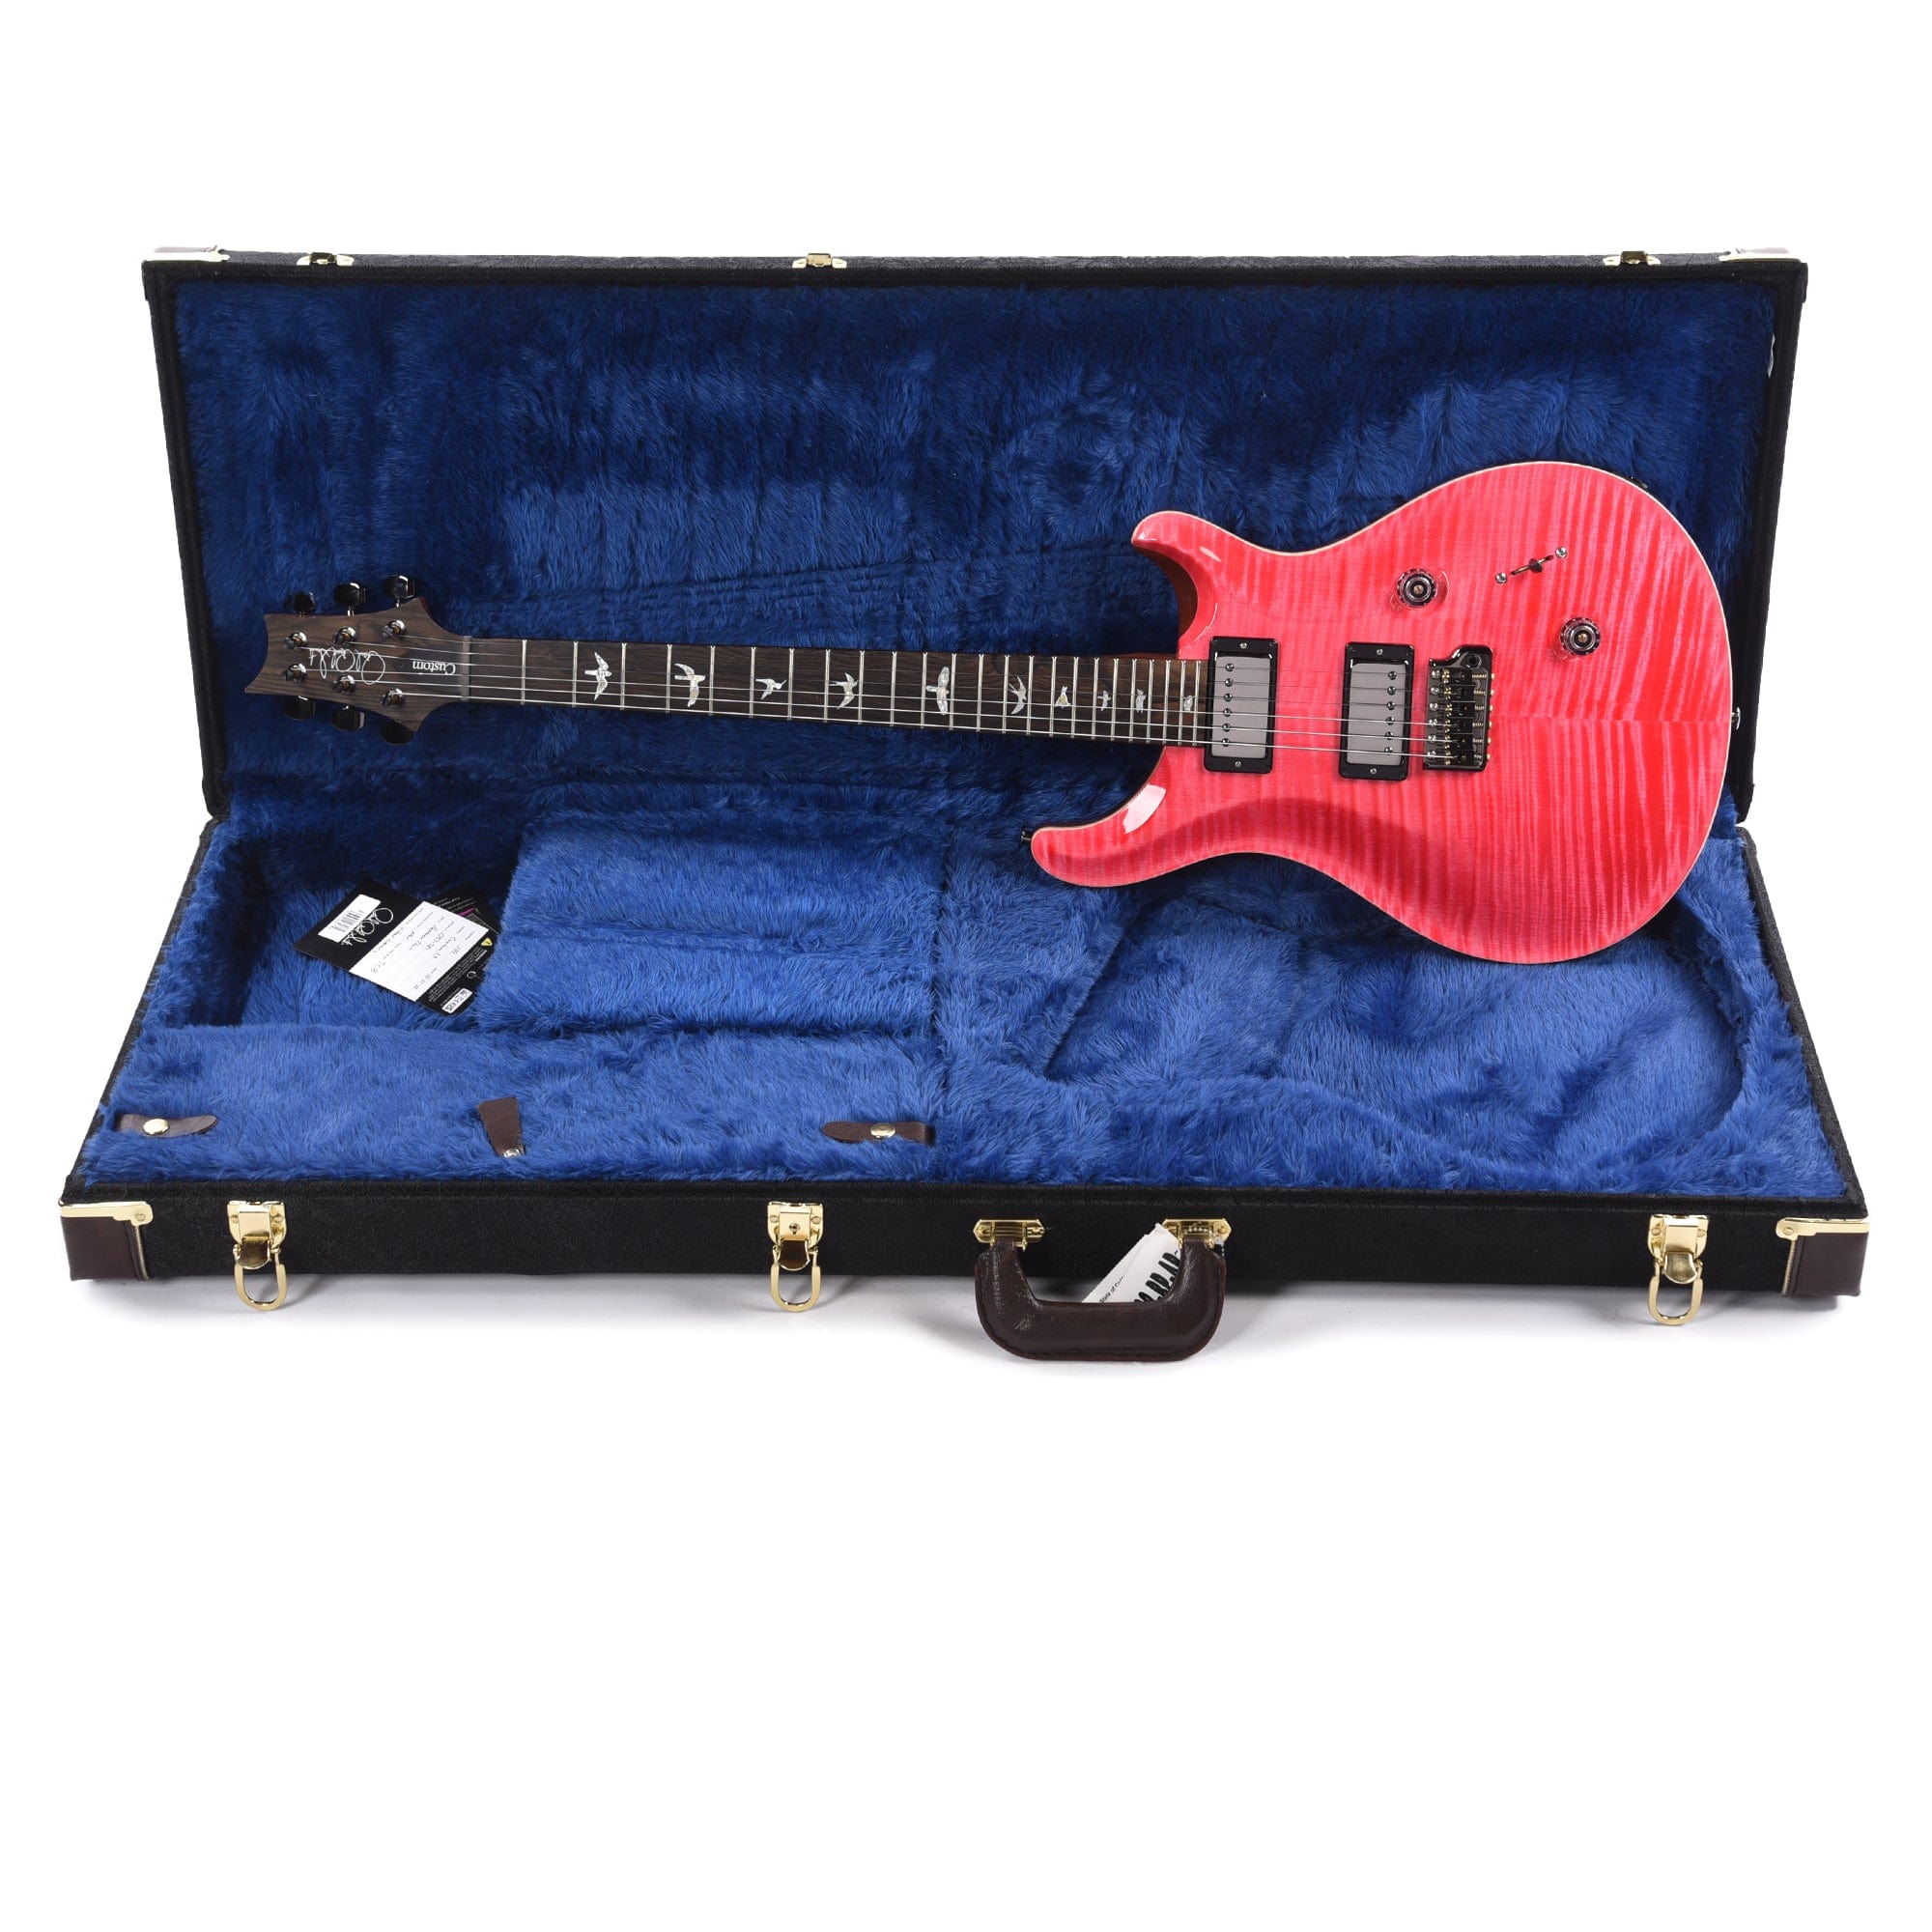 PRS Wood Library Custom 24 10-Top Flame Bonnie Pink w/Ziricote Fingerboard & Smoked Black Hardware Electric Guitars / Solid Body